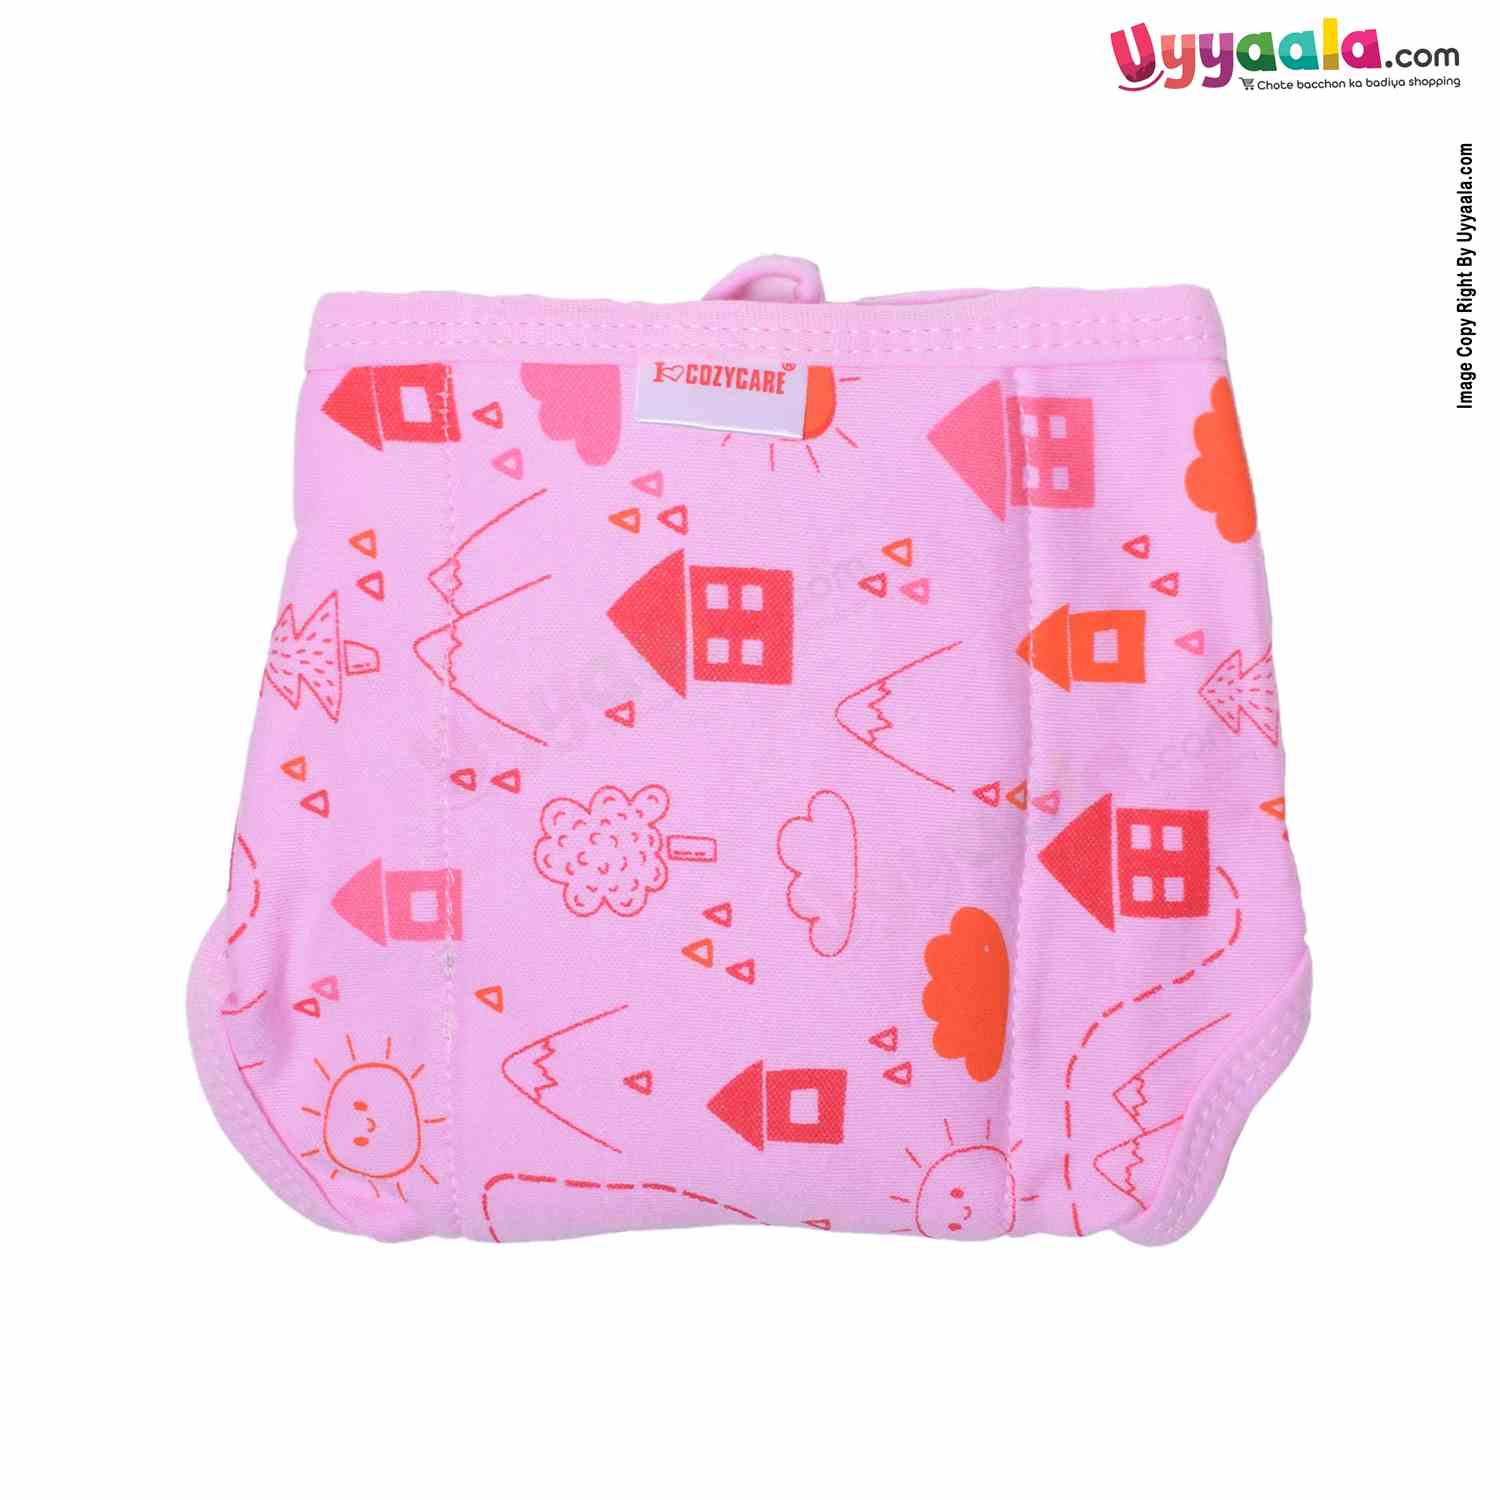 COZYCARE Washable Diapers Hosiery Tying Model House Print Green, Pink & Yellow 3P Set (XS)